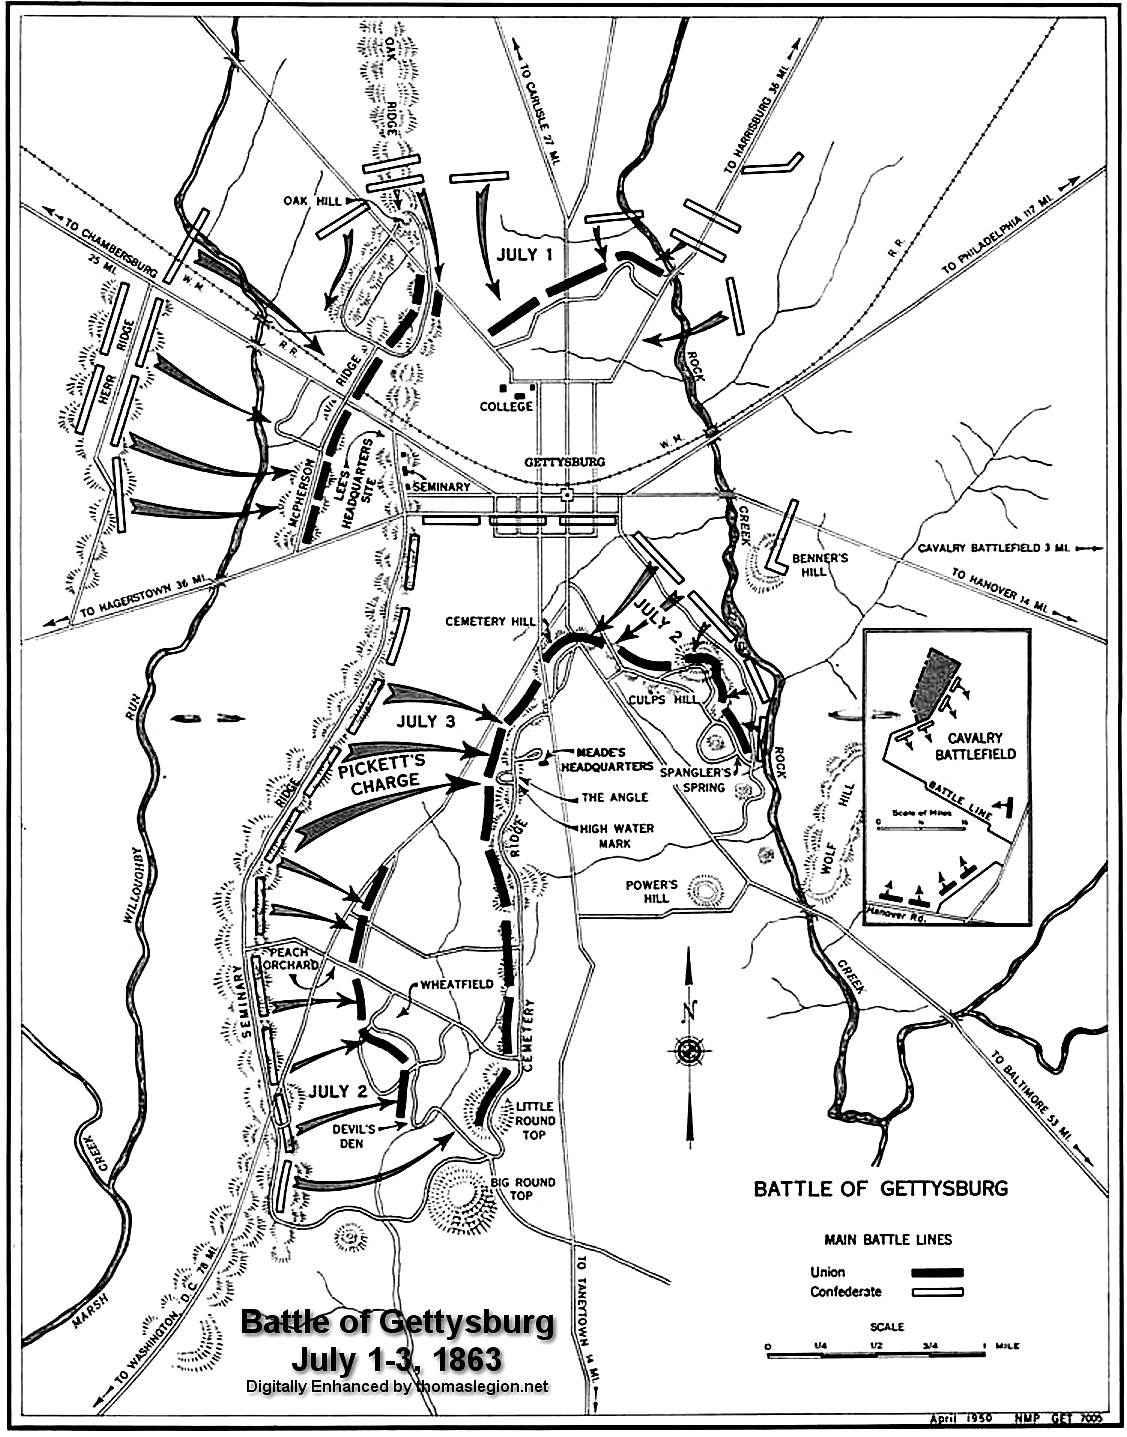 Pickett's Charge and Battle of Gettysburg.jpg